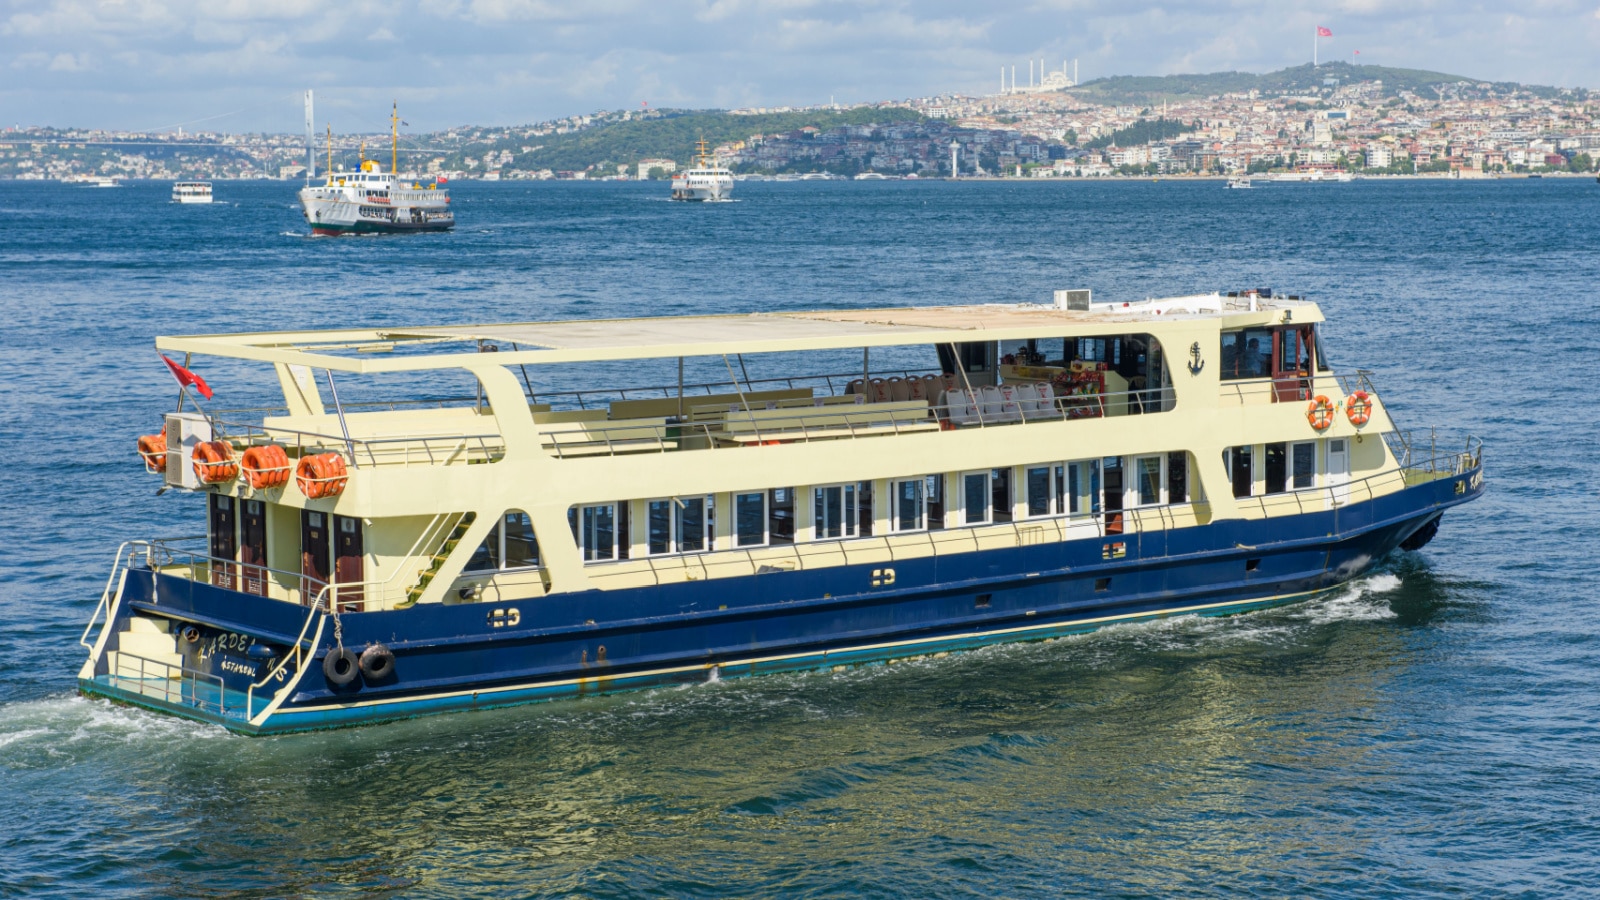 ISTANBUL, TURKEY - OCTOBER 5, 2021: Special ferry near Halic, a private ferry operator which owns and operates urban and international ferry service in western Turkey.